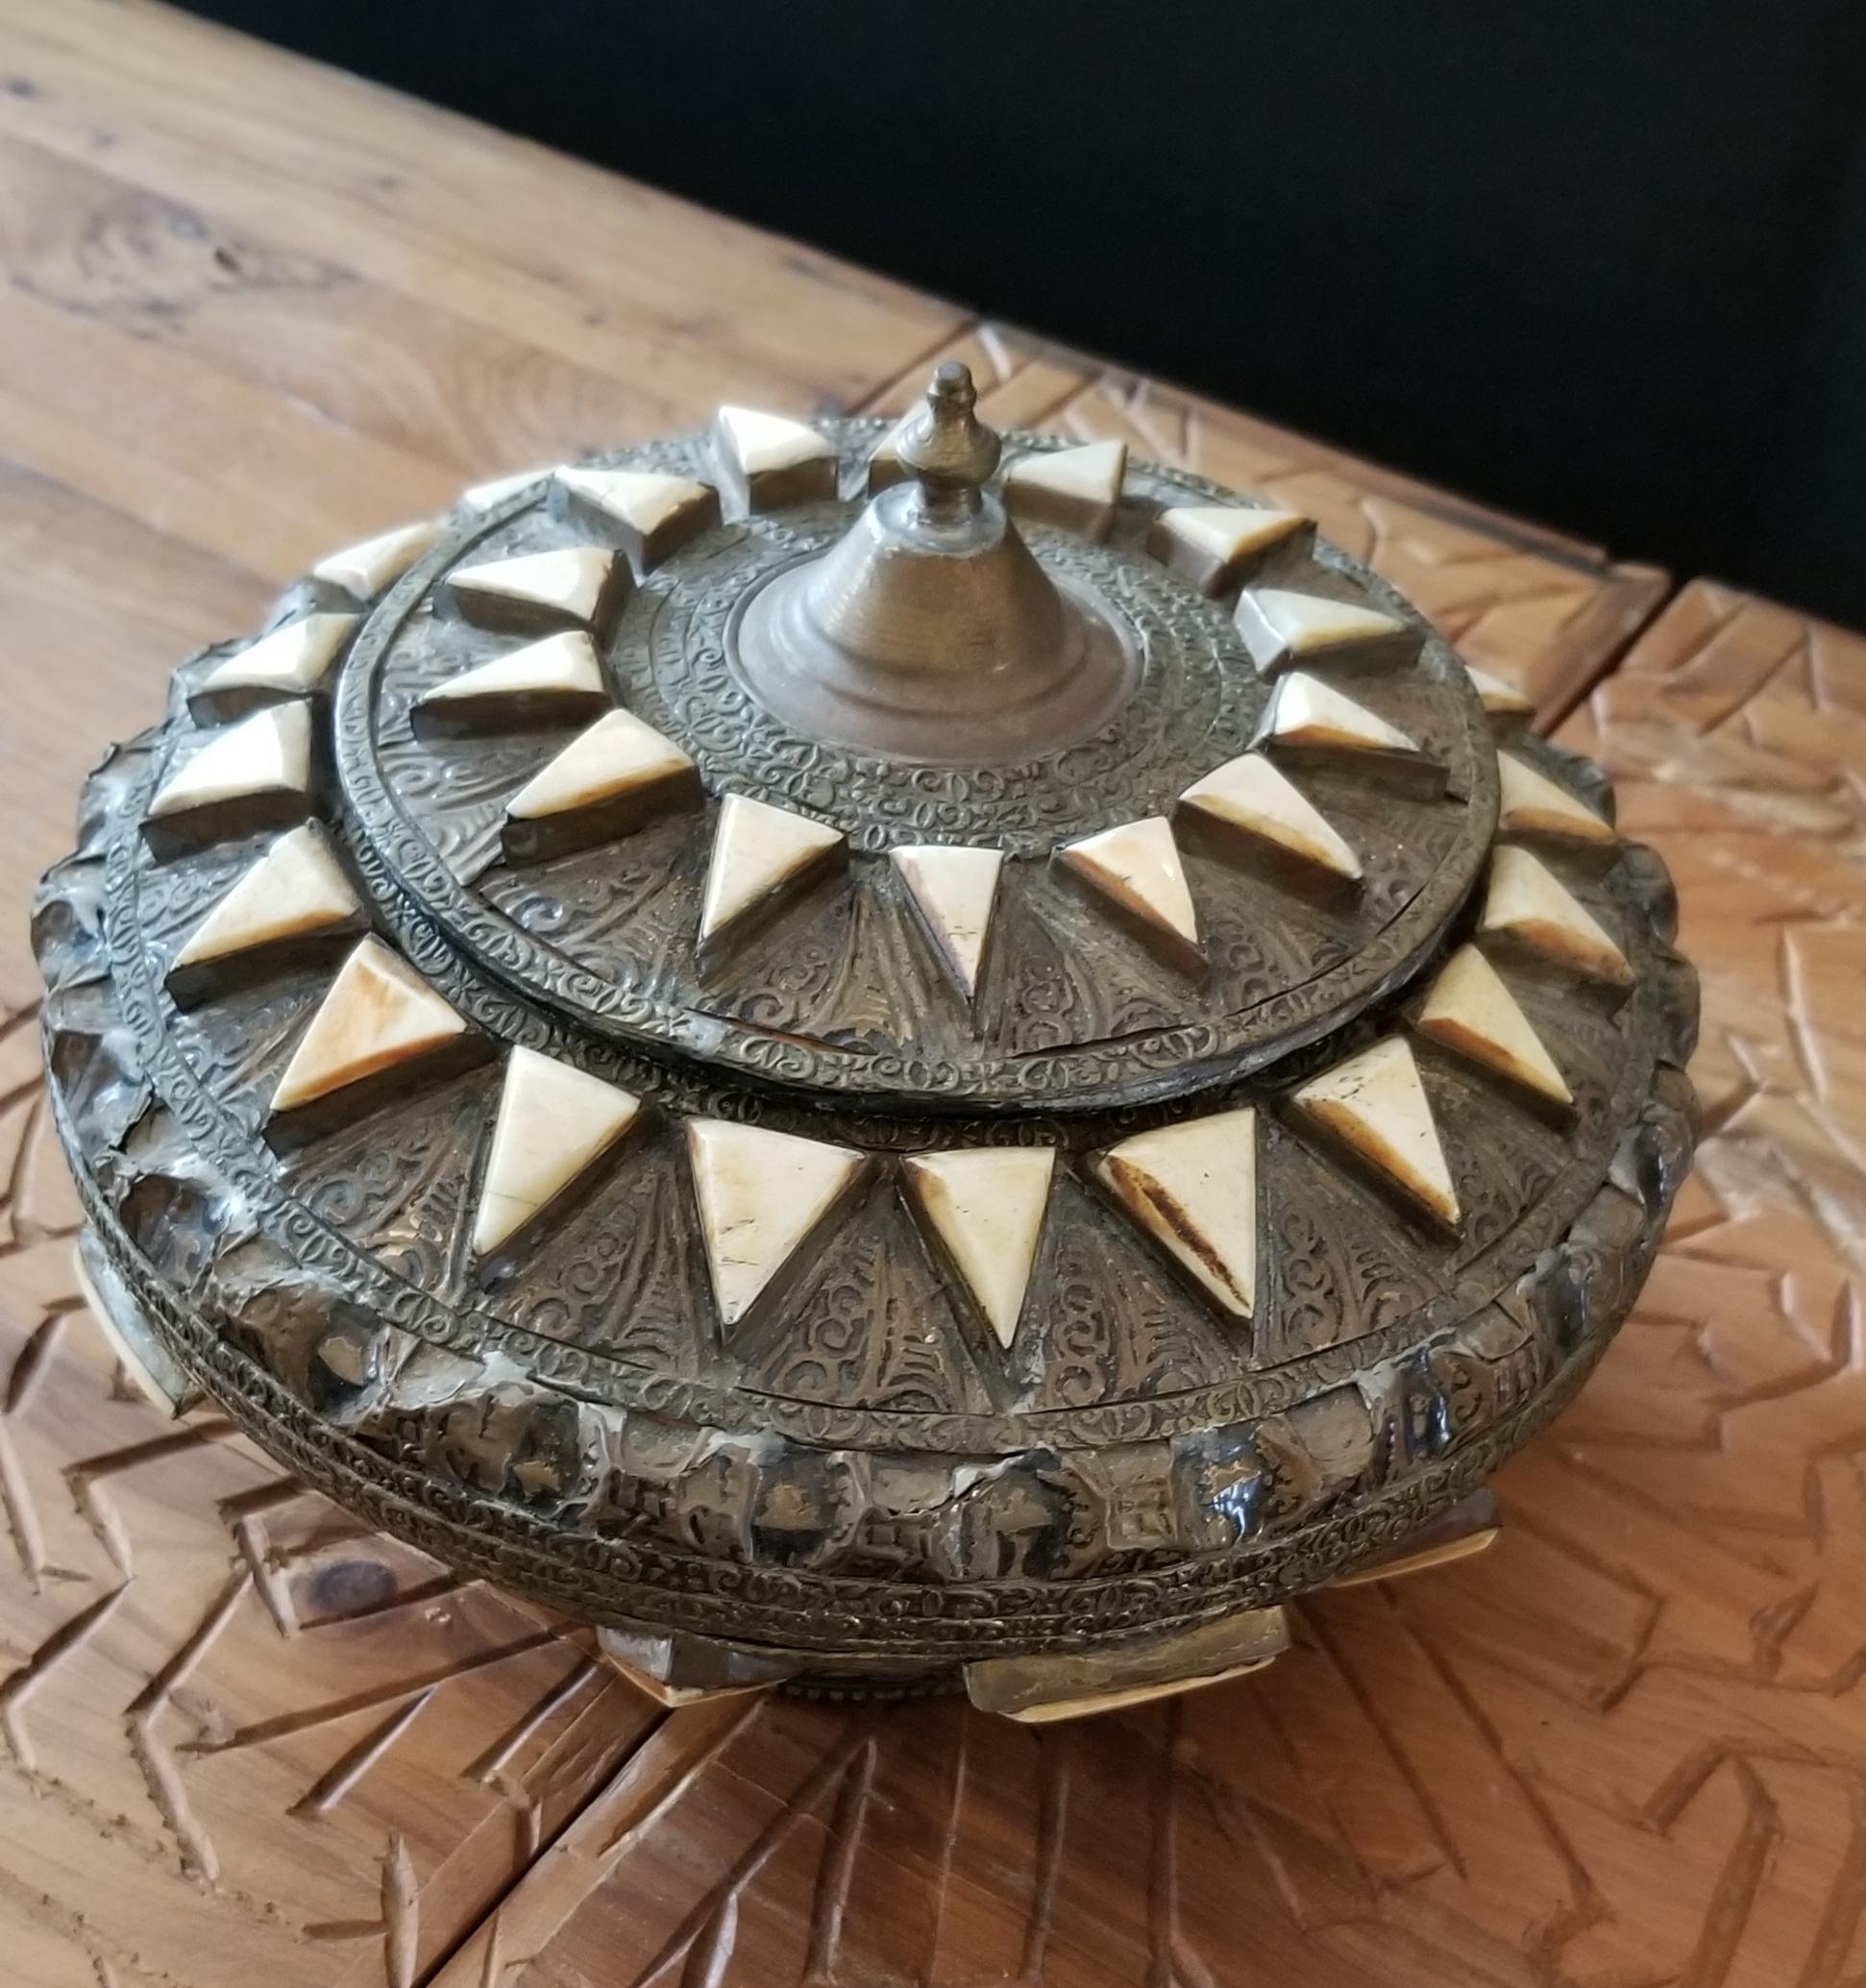 In remarkable condition.
Made from metal and inlaid with camel bone fragments, this beautiful Moroccan tobacco / spice box is a few decades old, and has a few signs of signs of wear and tear. Great for decoration with its amazing patterns